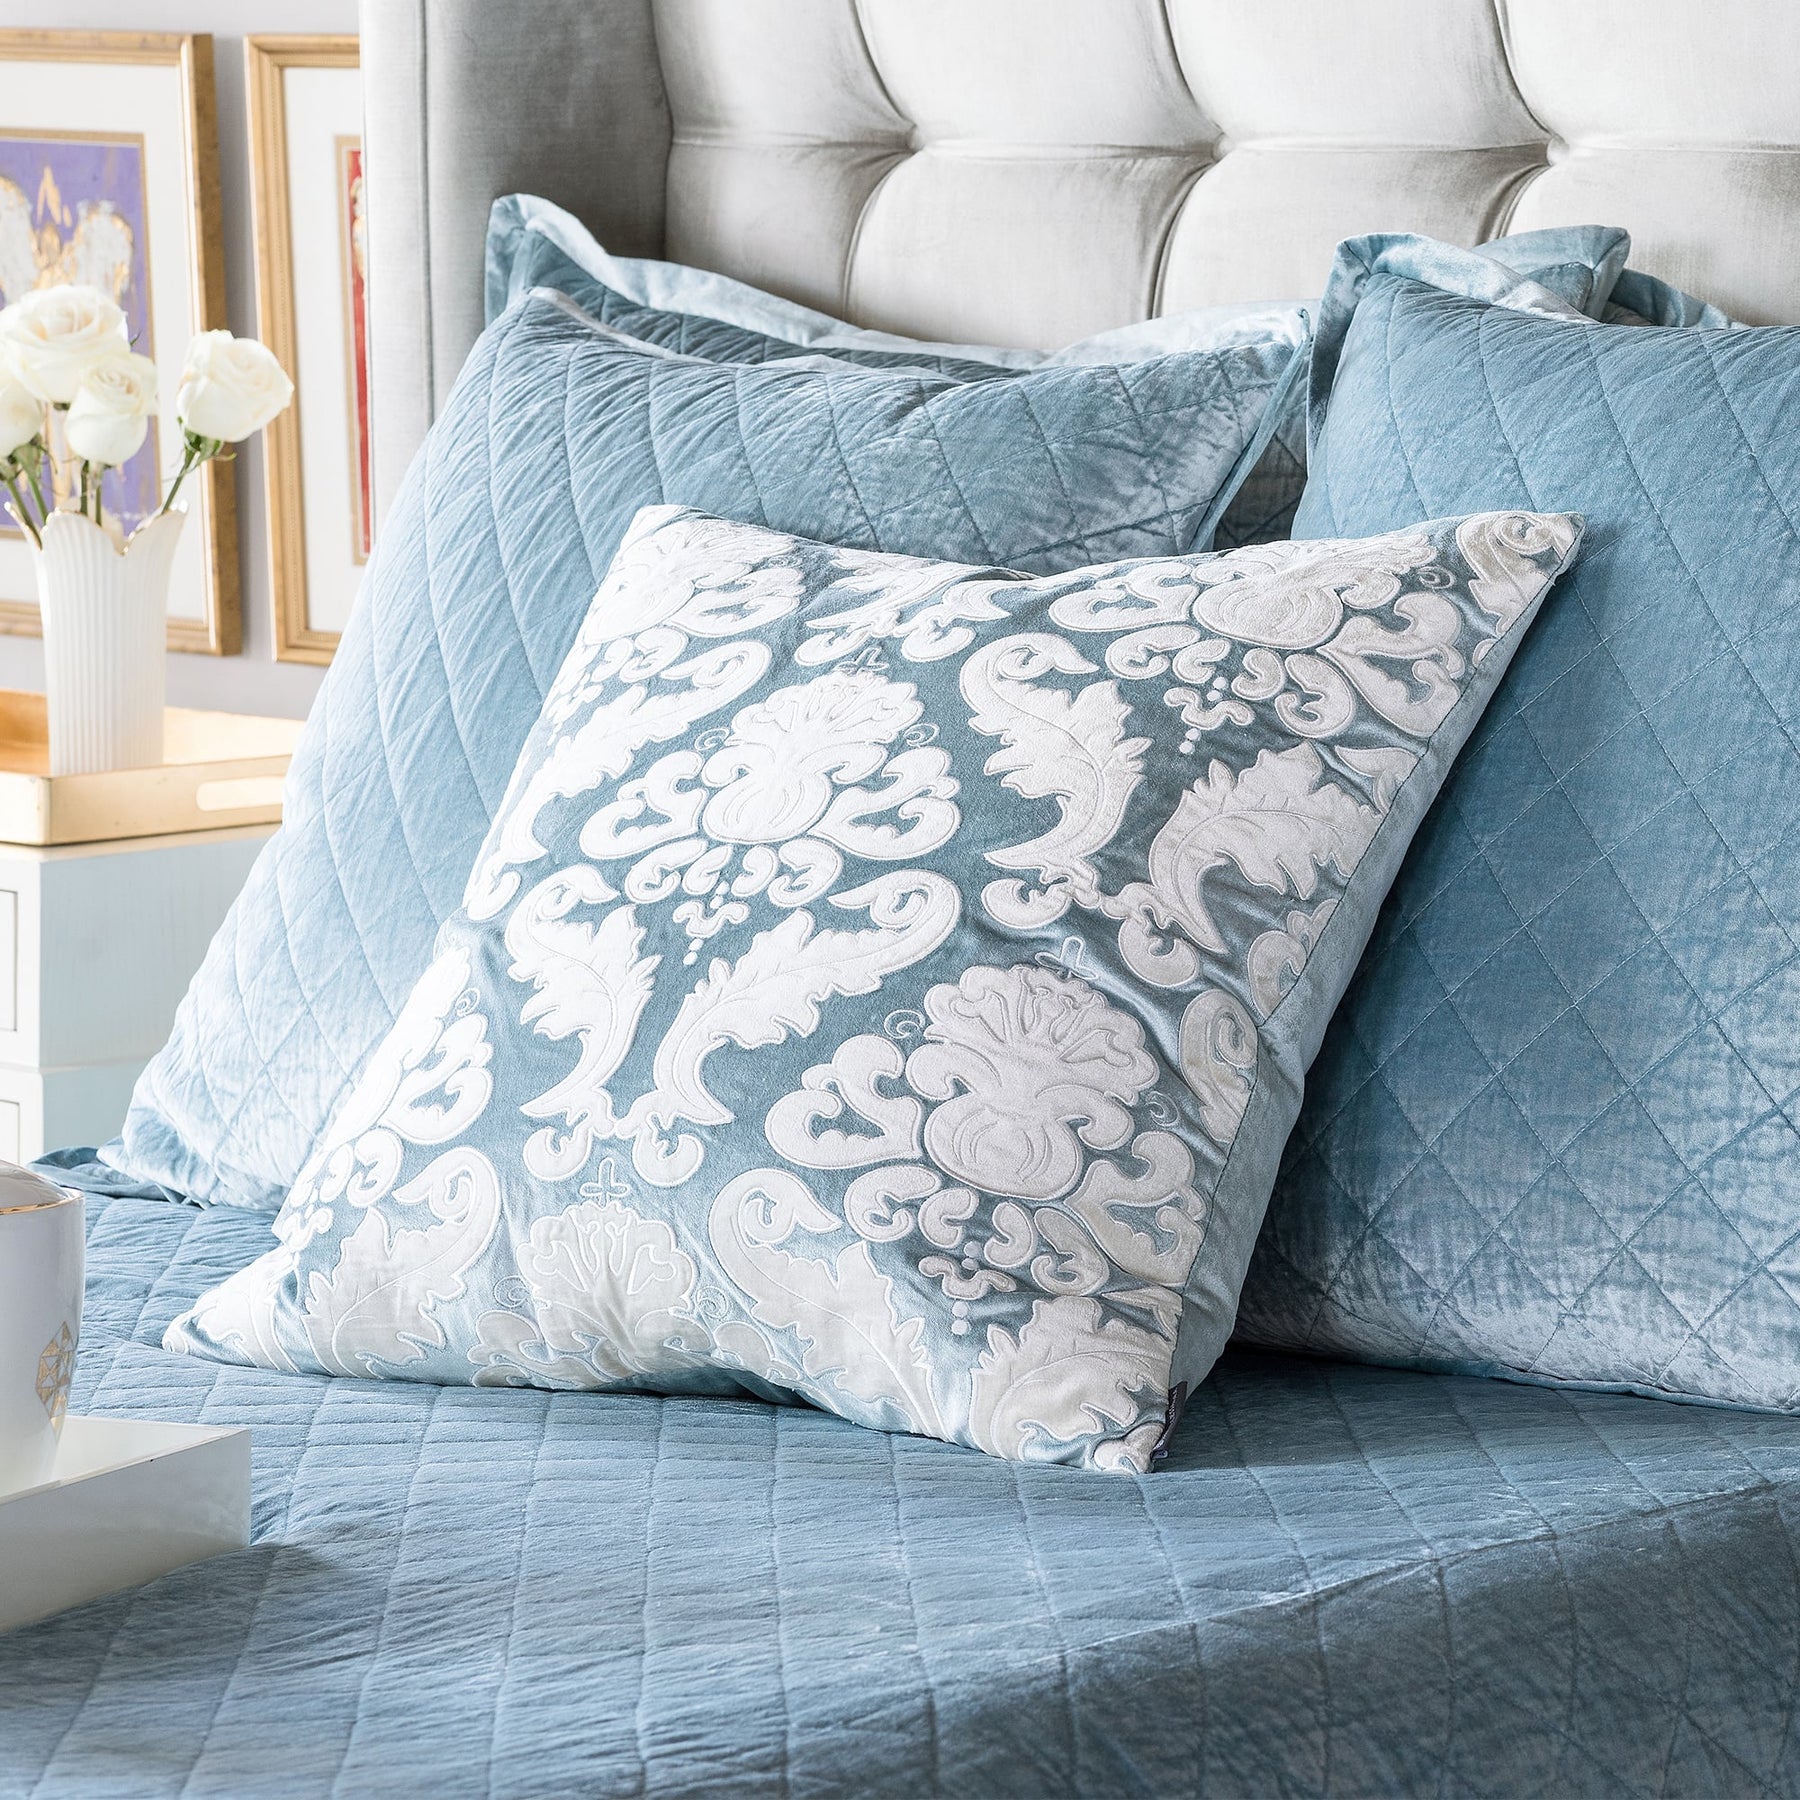 Versailles Square Pillow Ice Blue / Ivory Velvet (24X24) by Lili